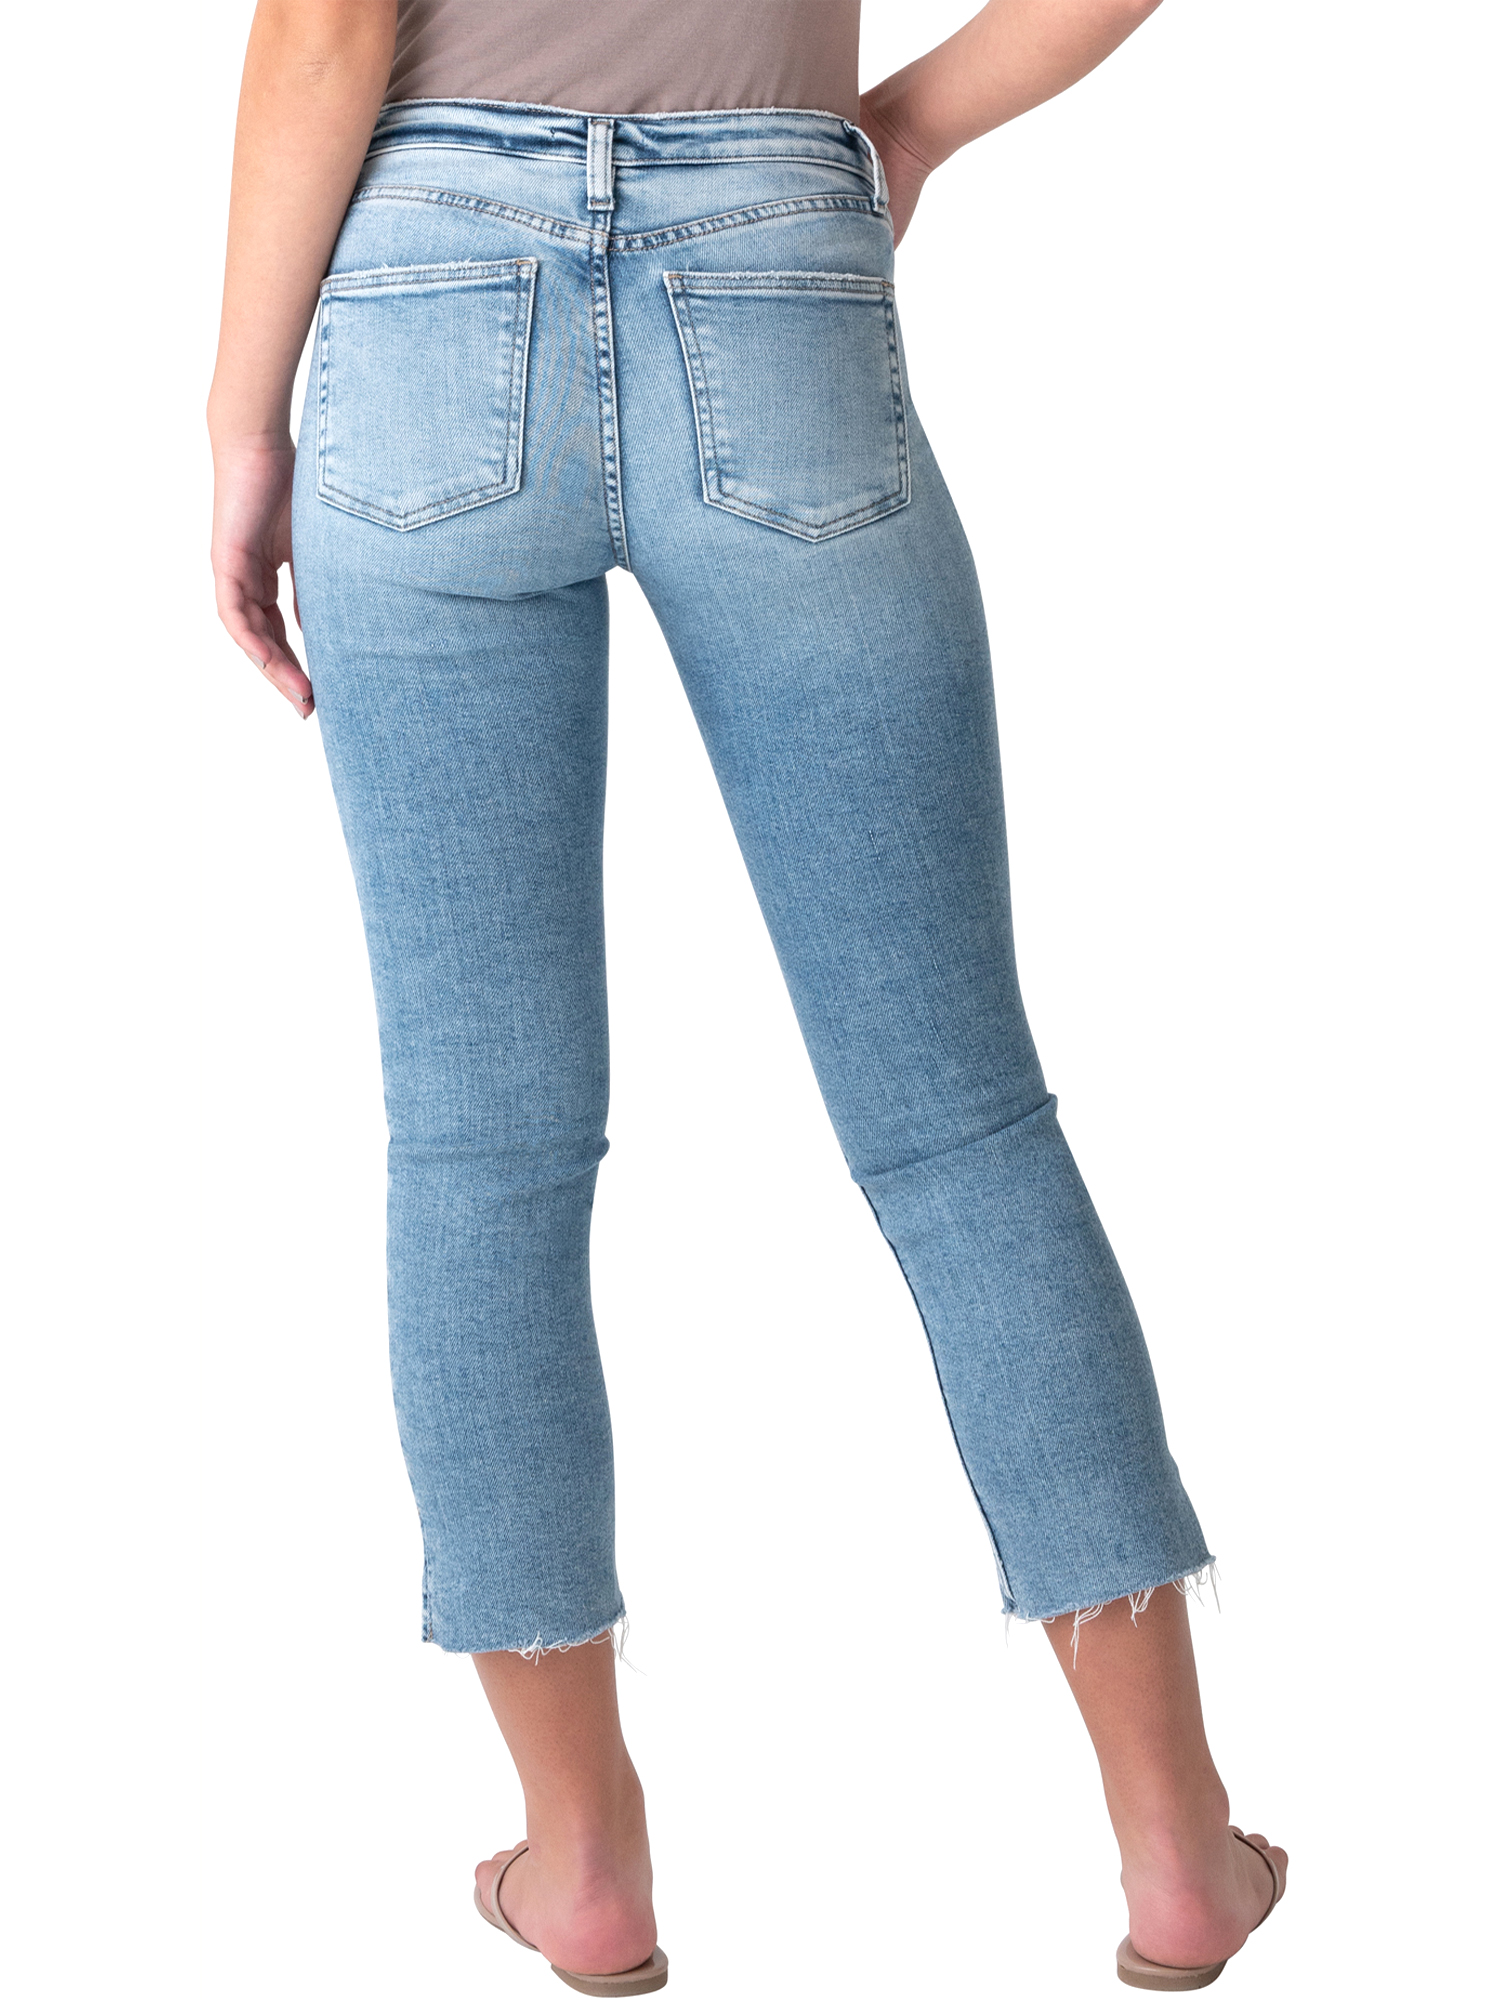 Silver Jeans Co. Women's Most Wanted Mid Rise Straight Crop Jeans Crop, Waist Sizes 24-36 - image 2 of 3